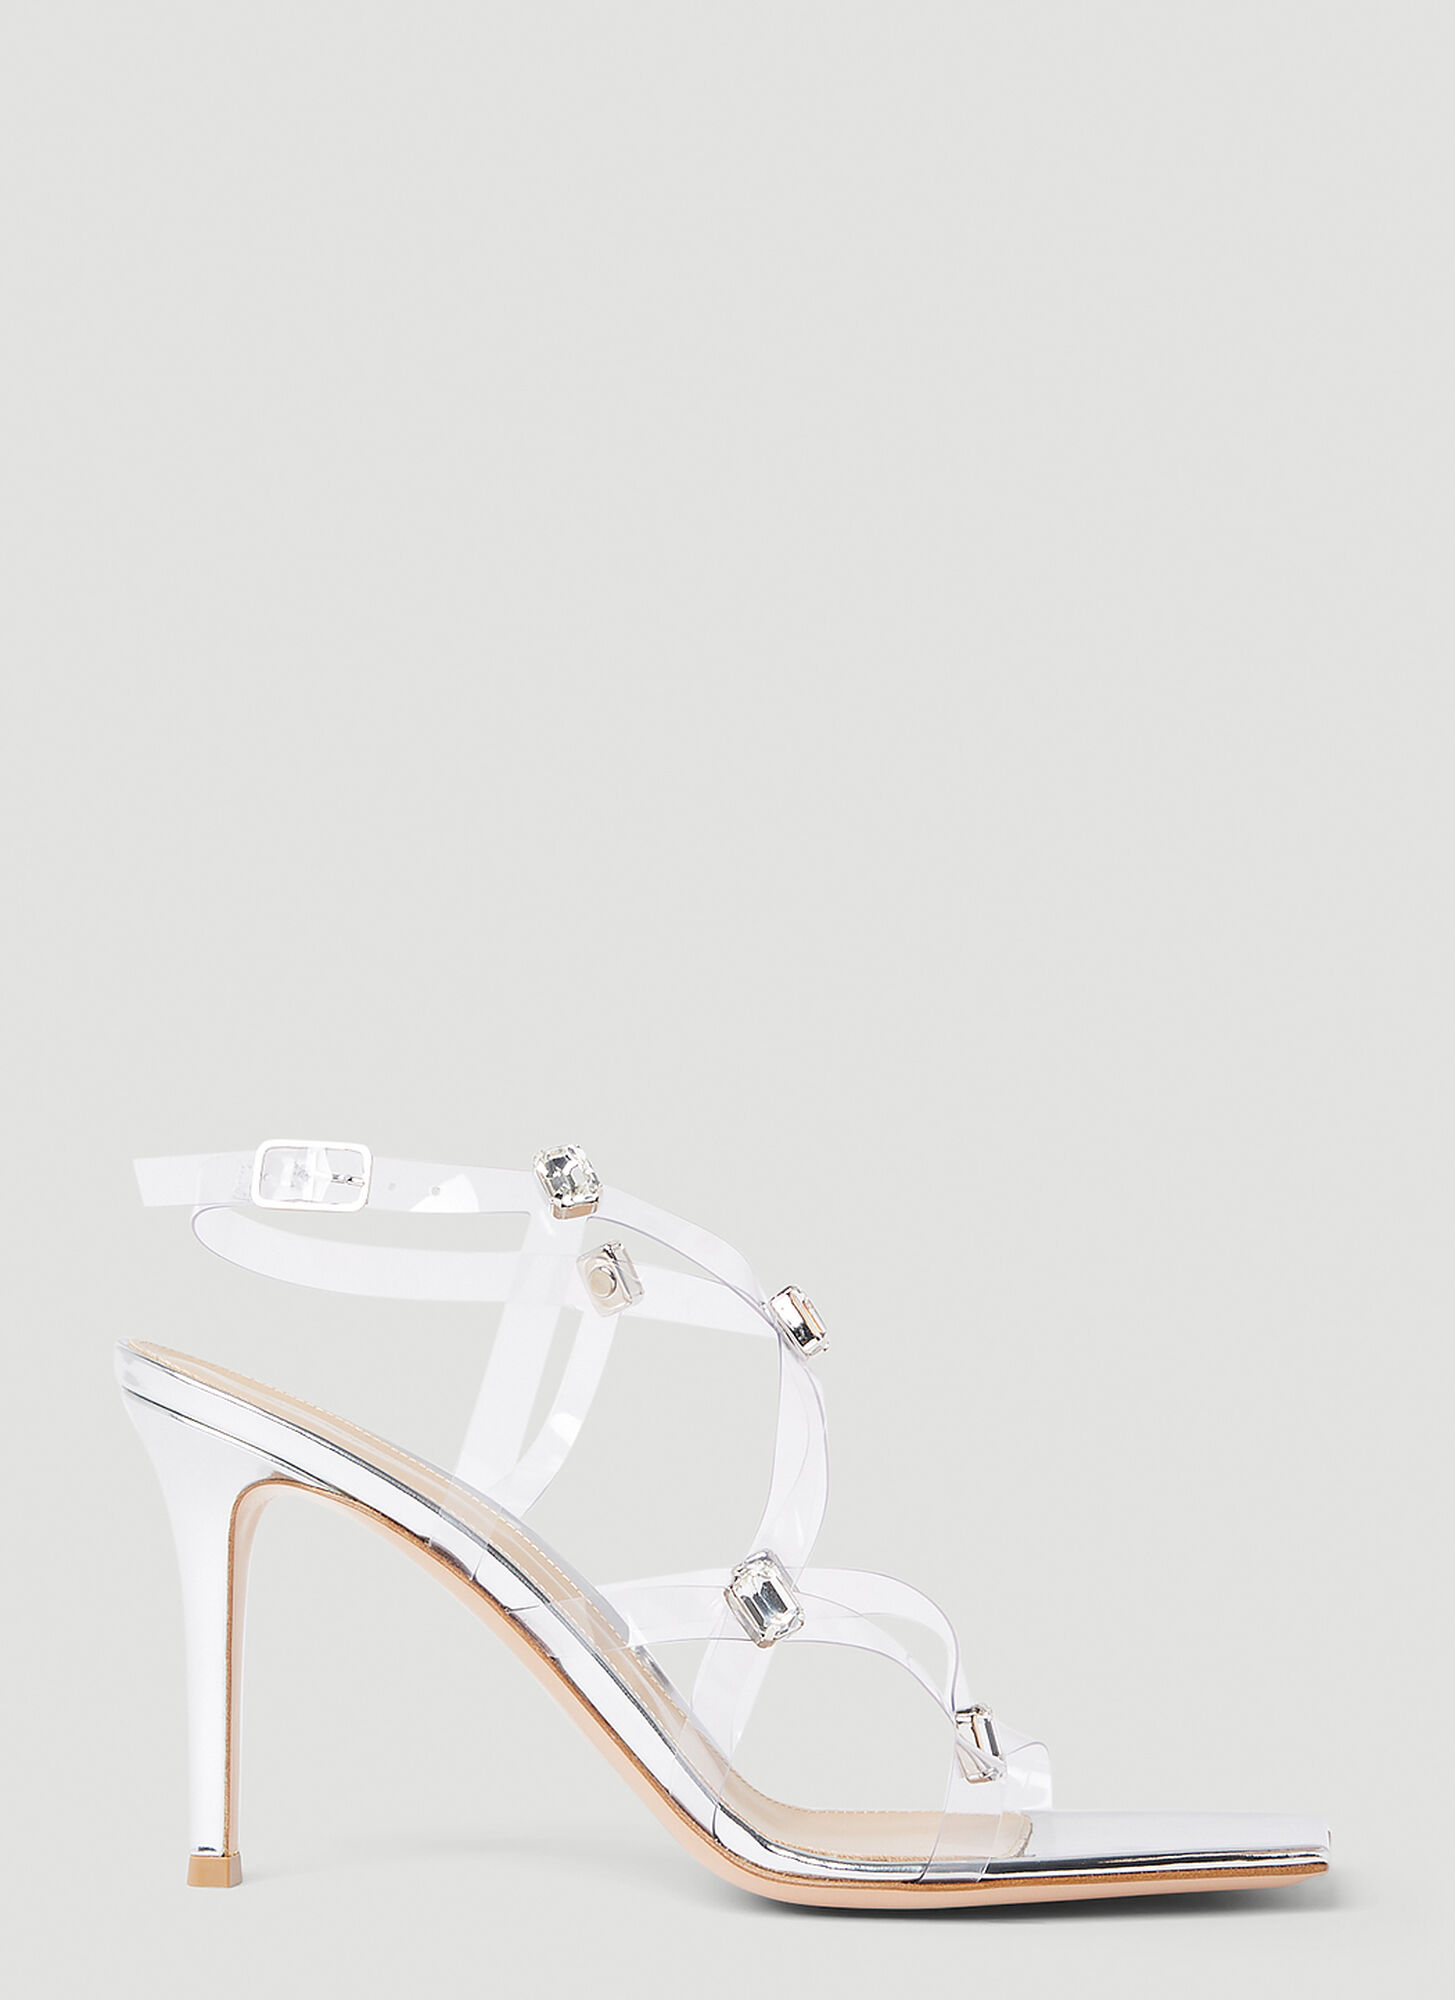 Gianvito Rossi Embellished Strappy Sandals In Silver